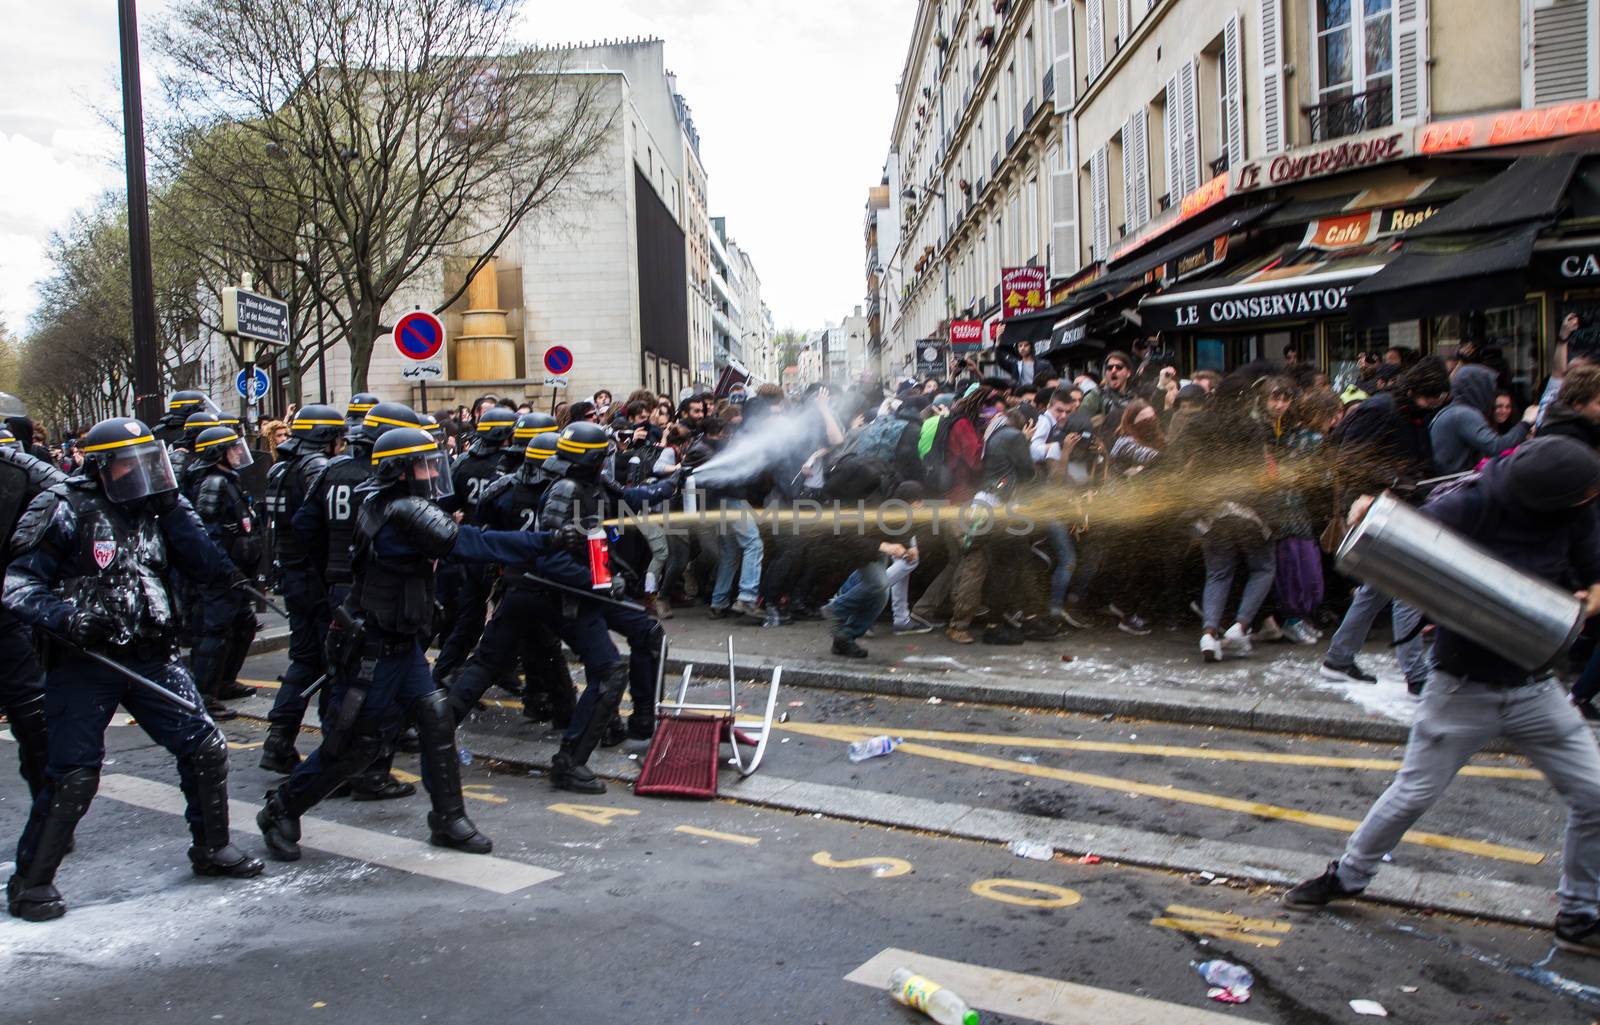 FRANCE, Paris: Riot policemen throw tear gas at protesters as hundreds demonstrate against the French government's proposed labour law reforms on April 14, 2016 in Paris. Fresh strikes by unions and students are being held across France against proposed reforms to France's labour laws, heaping pressure on President Francois Hollande who suffered a major defeat over constitutional reforms on March 30.